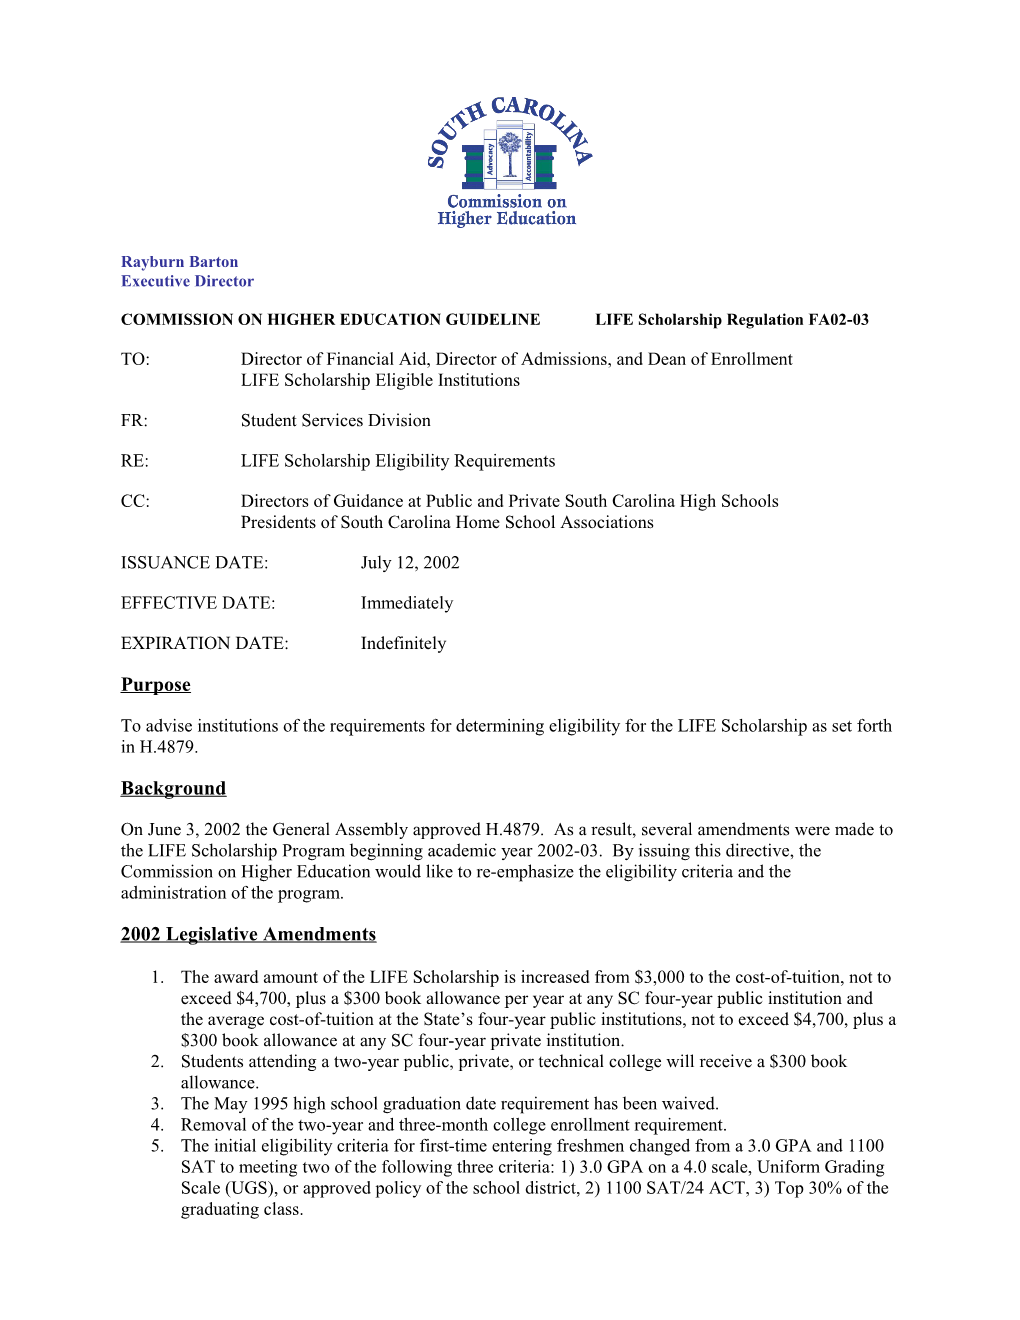 COMMISSION on HIGHER EDUCATION GUIDELINE LIFE Scholarship Regulation FA02-03